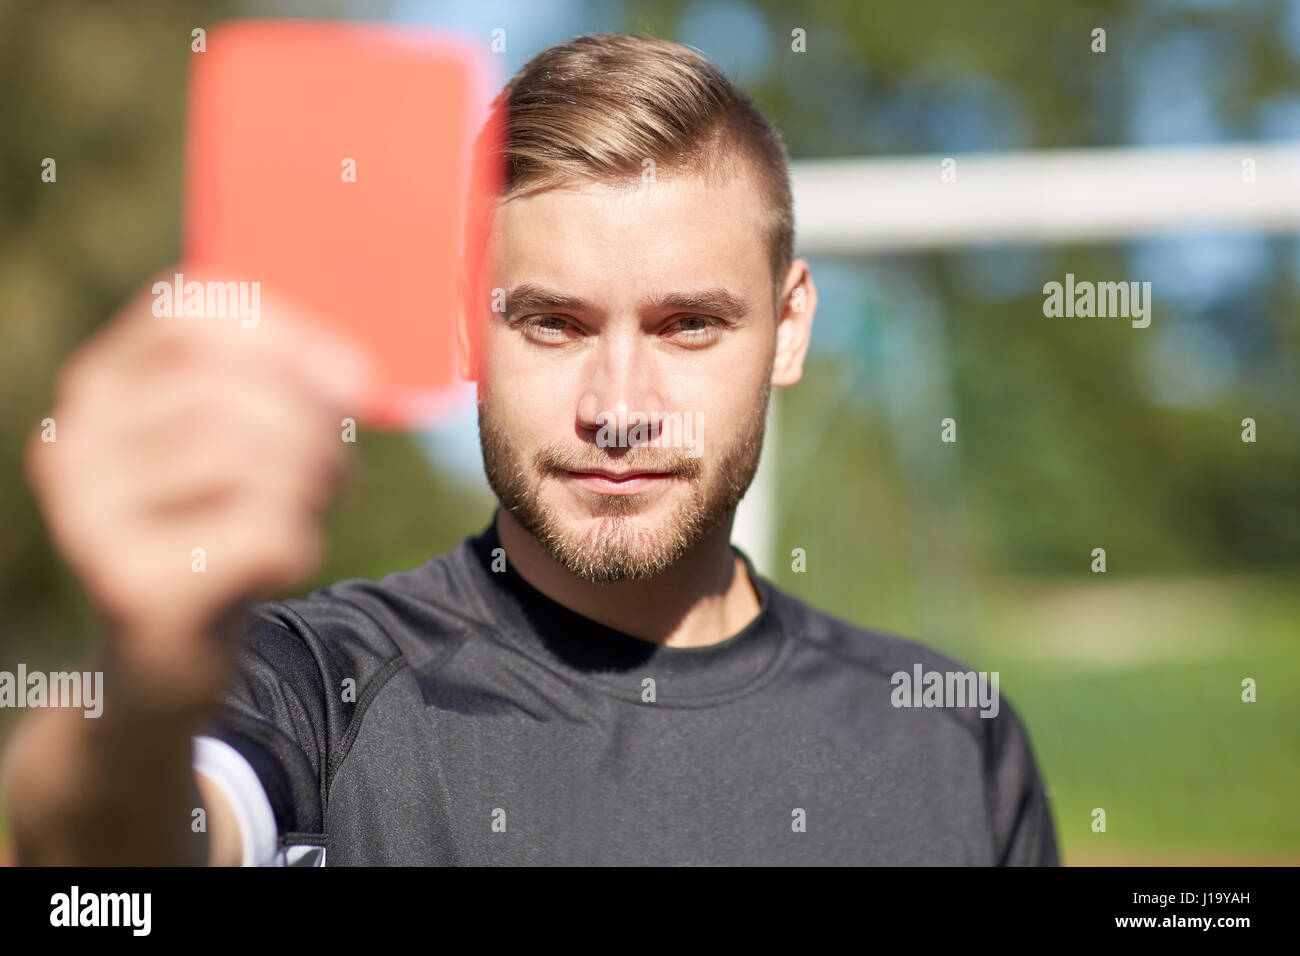 Referee On Football Field Showing Red Card Stock Photo Alamy